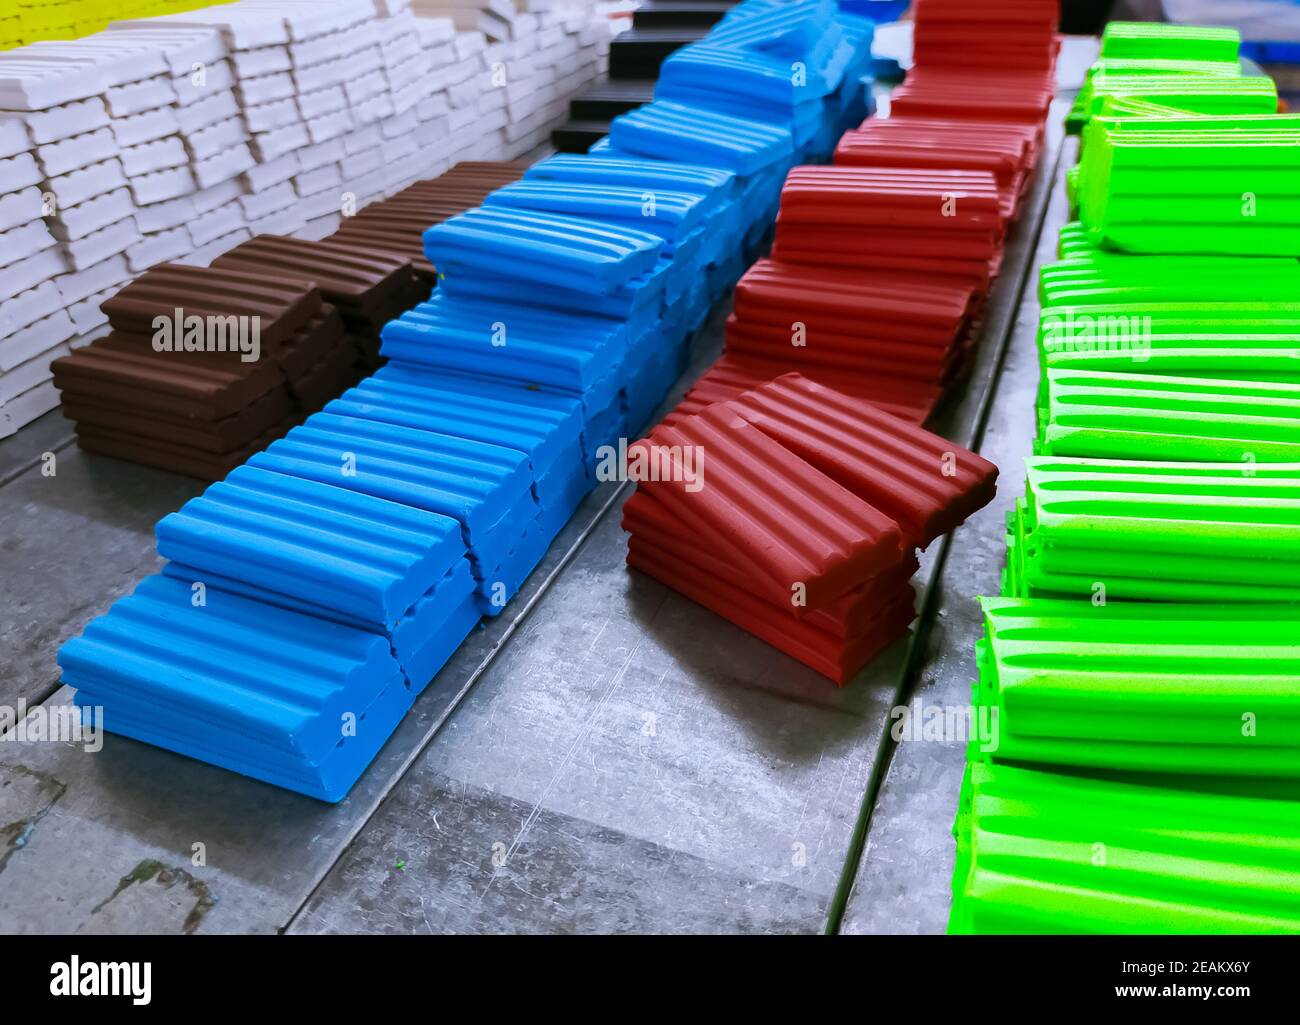 Heap of plasticine at production line in factory. Multi-colored modeling clay. Plasticine production industry. Modeling clay material for kids art education. Plasticine for preschool play dough. Stock Photo